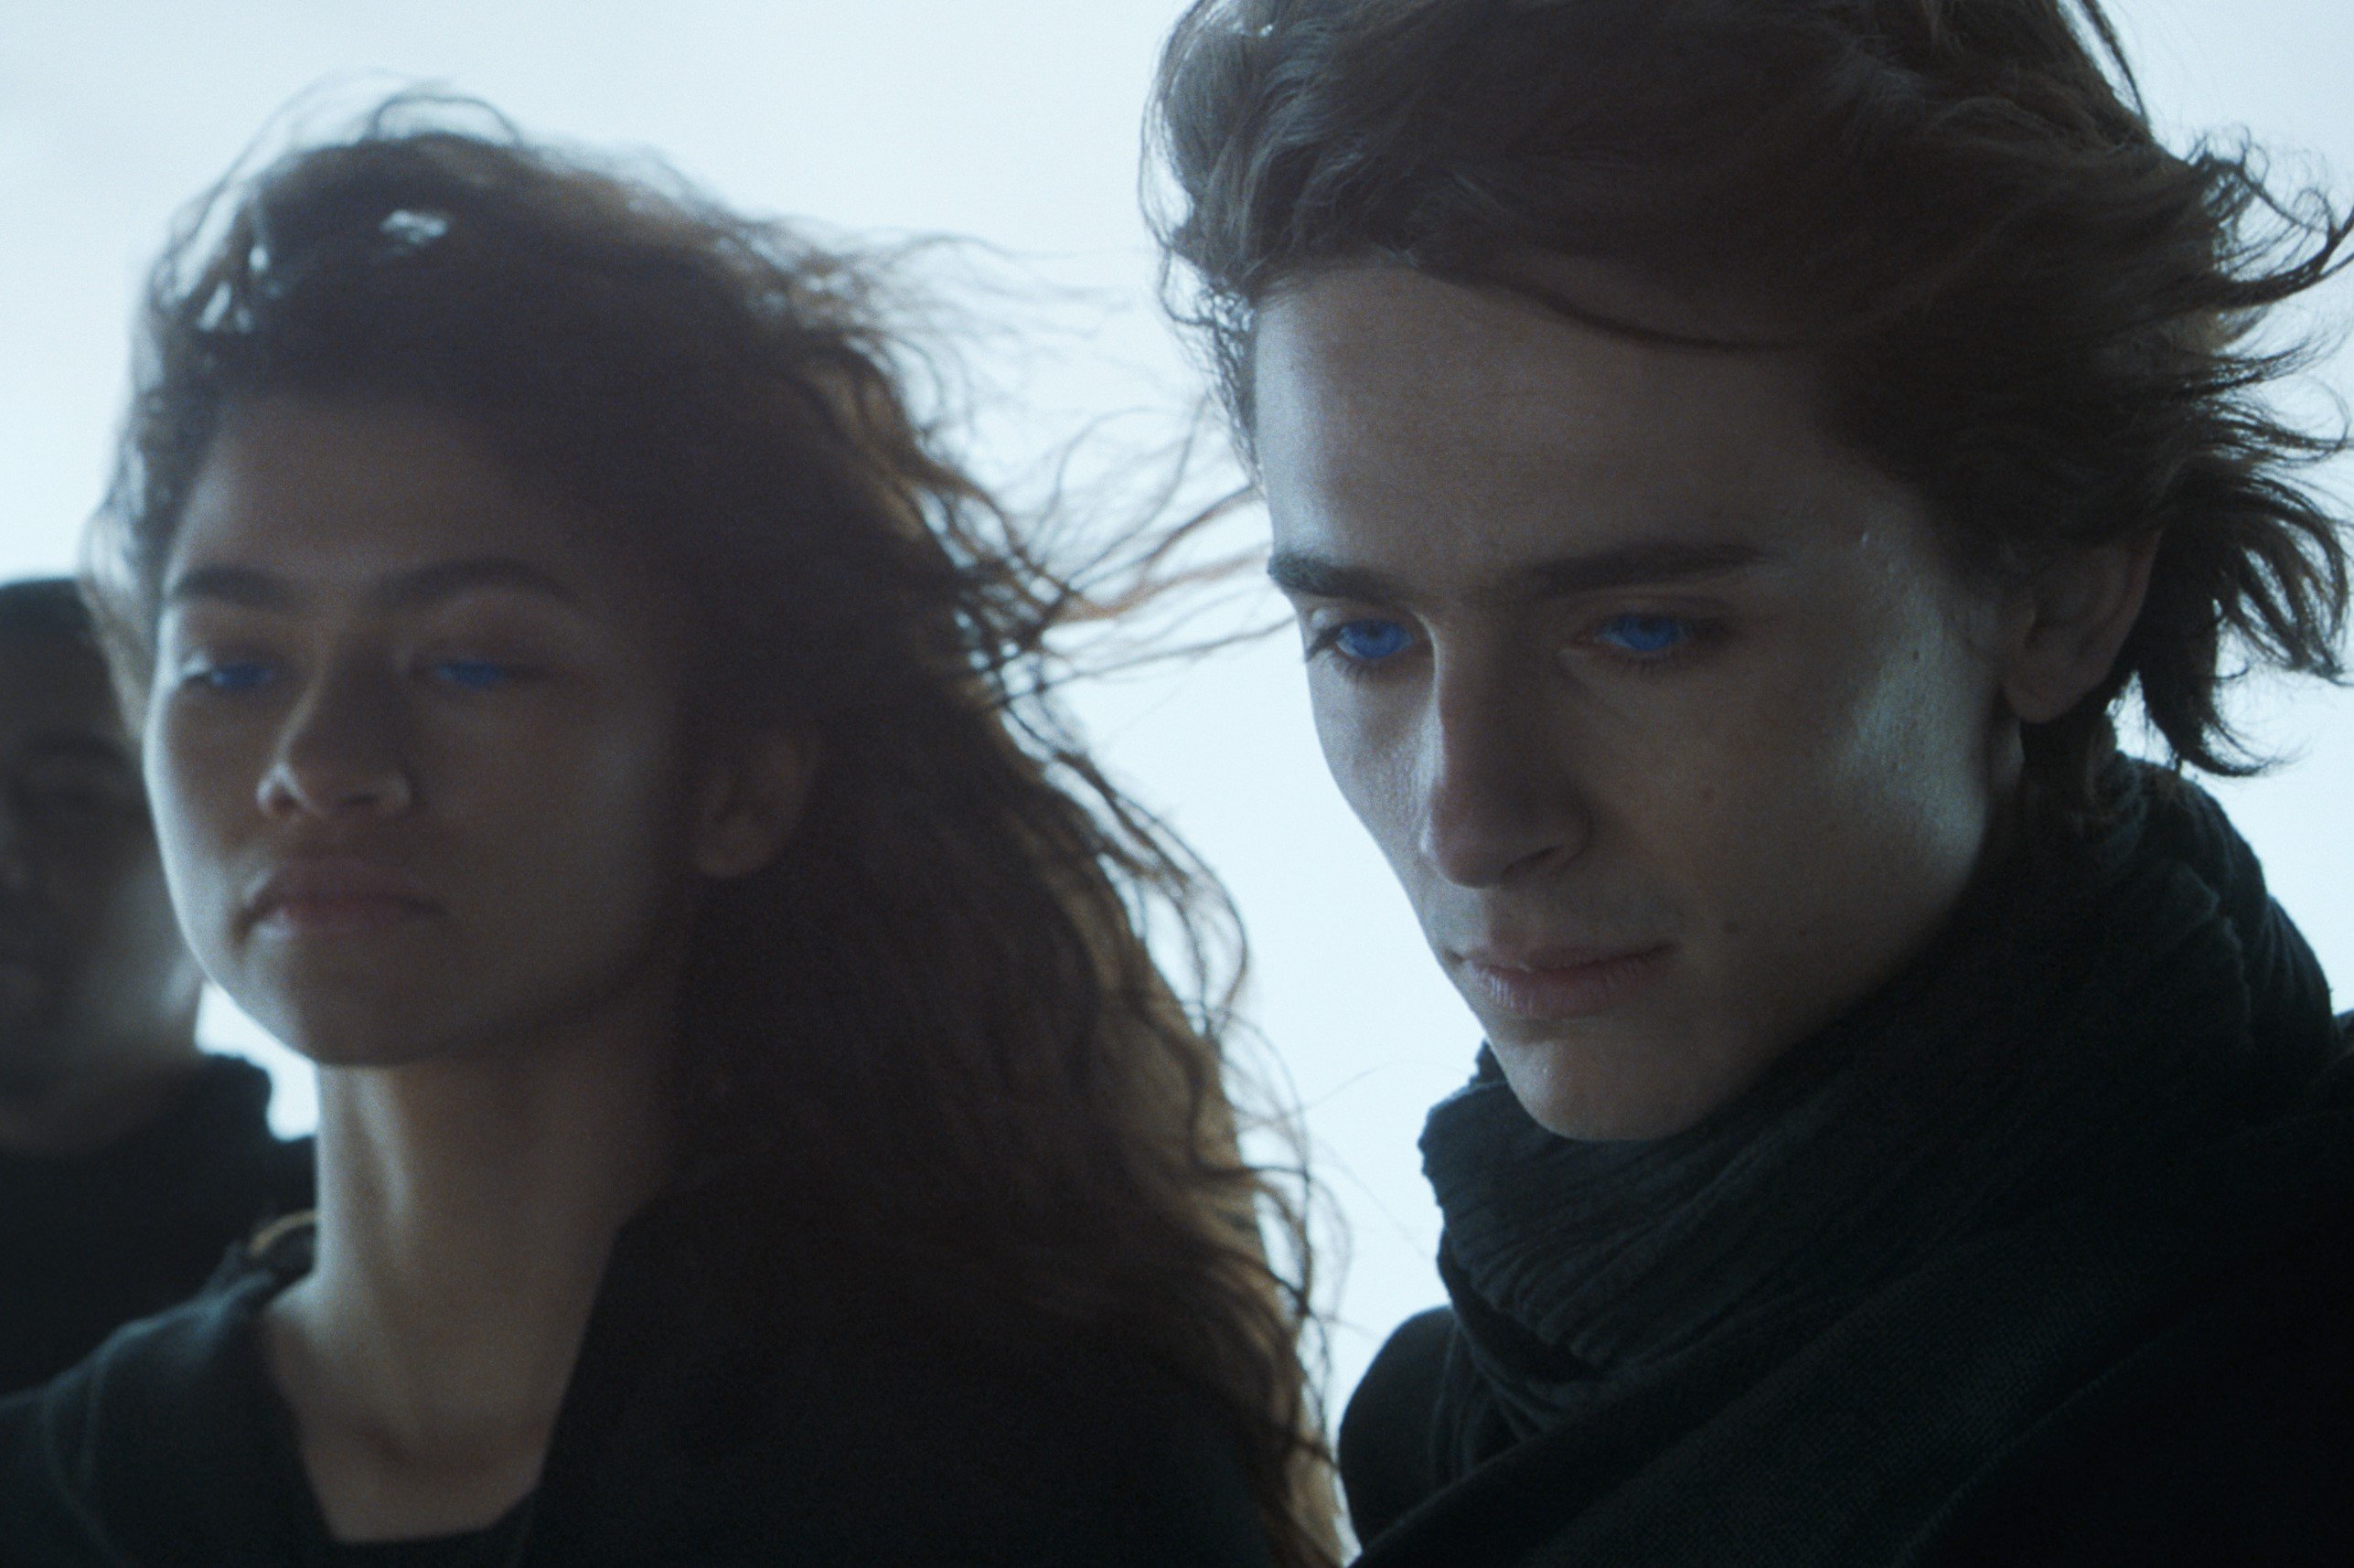 Zendaya and Timothée Chalamet , in black costumes, looking down to something in a still from the movie 'Dune.'